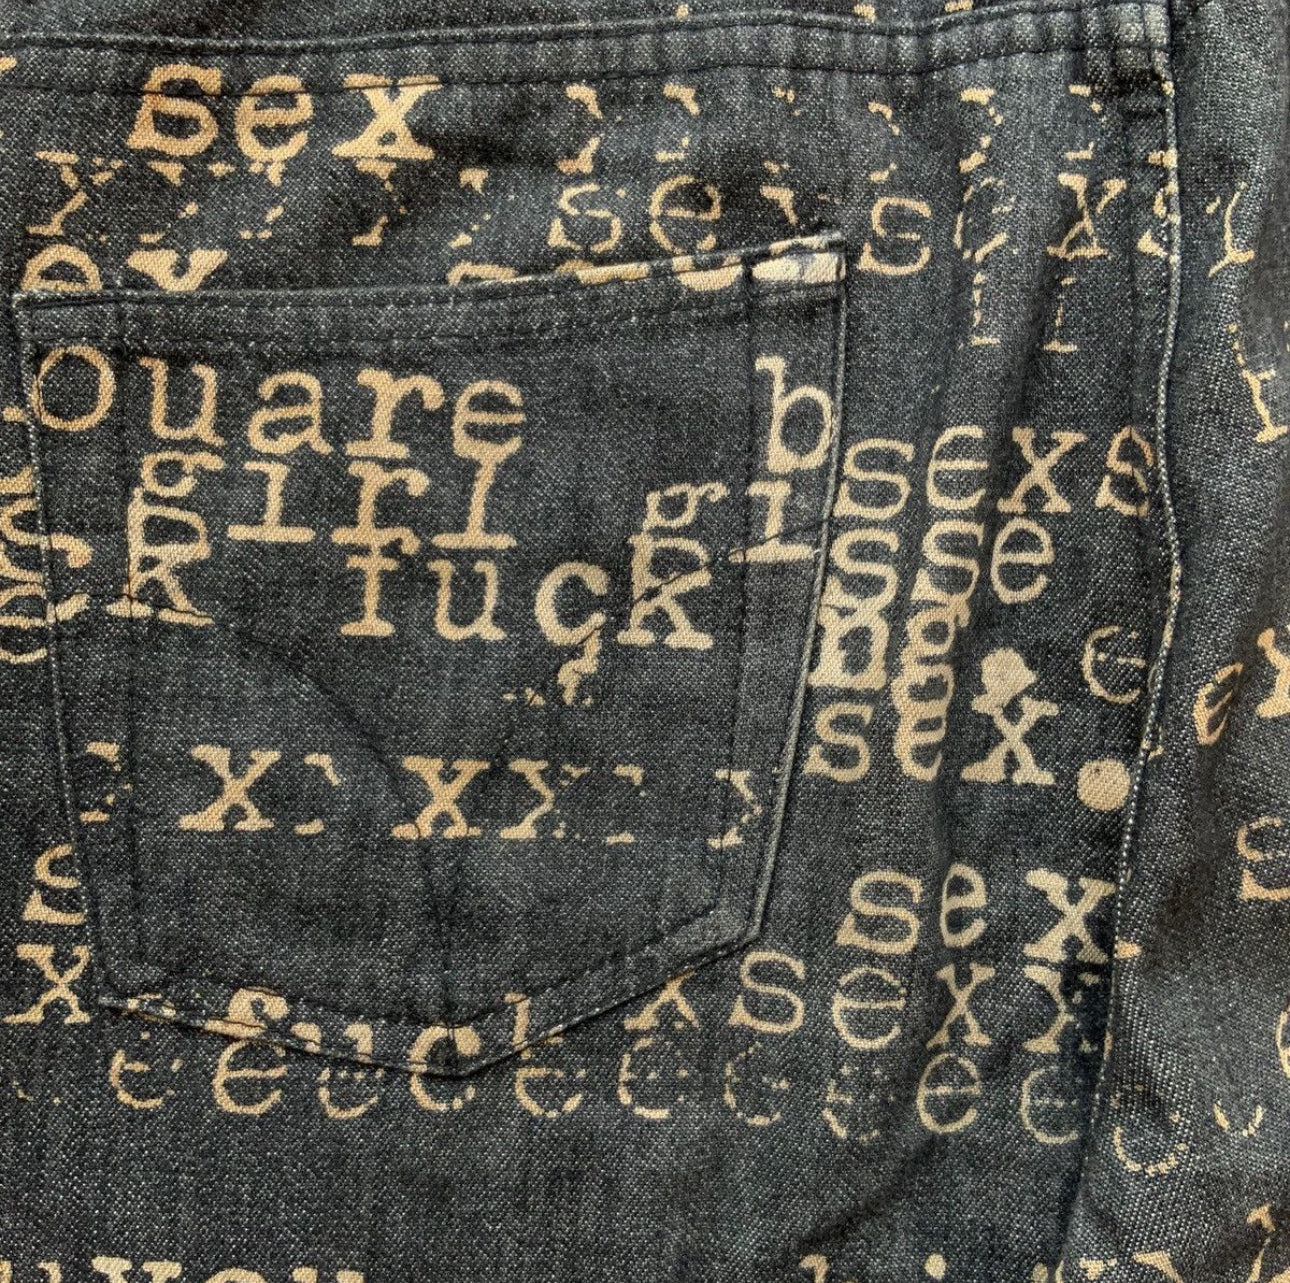 Hysteric Glamour SS 1999 Fuck Sex Bitch Flare Jeans